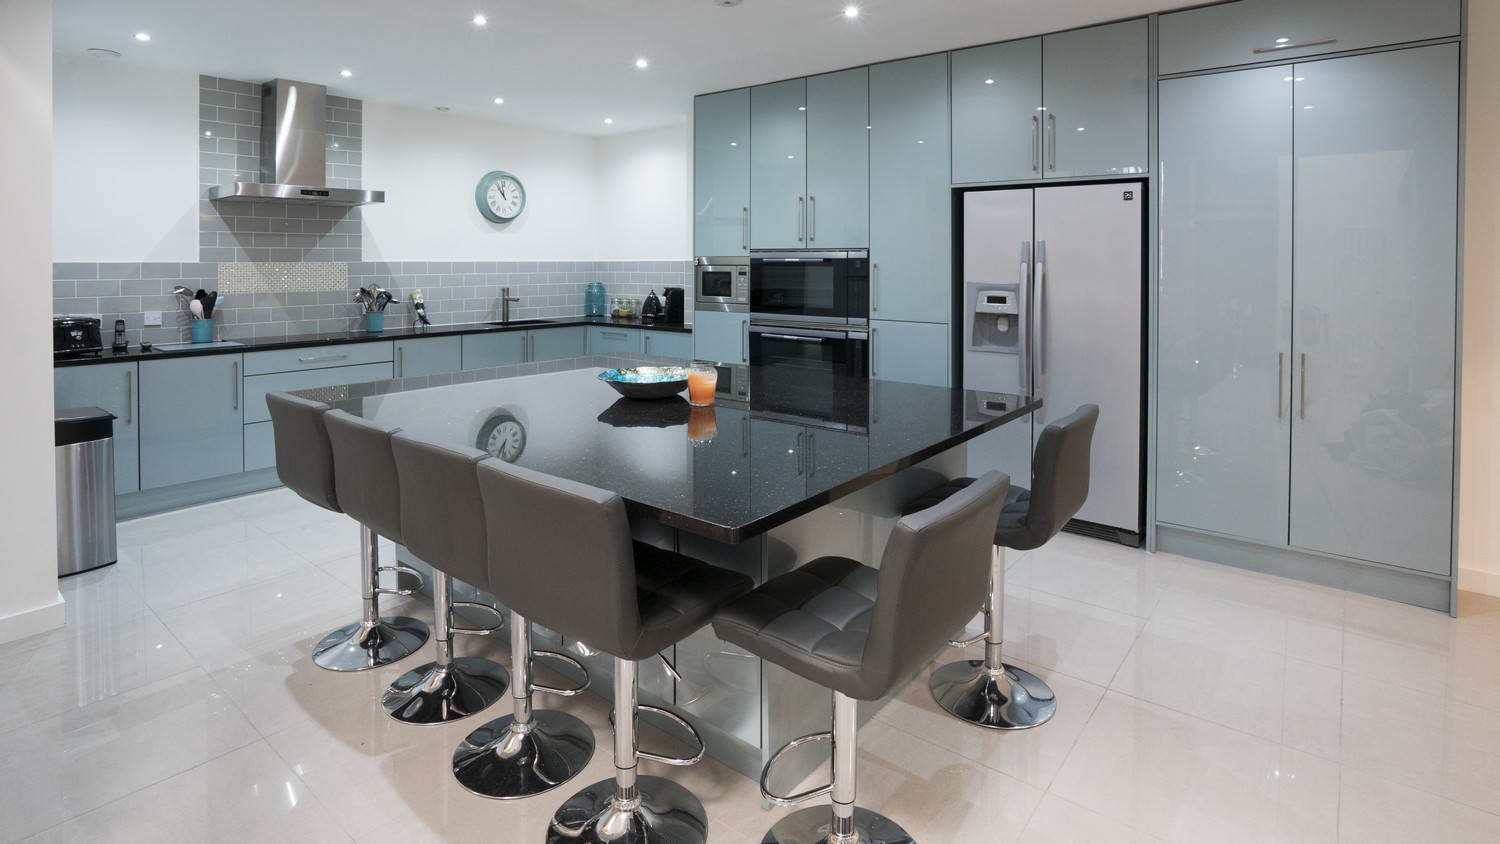 A large granite topped island with overhang and bar stools take center stage of this large high gloss kitchen.